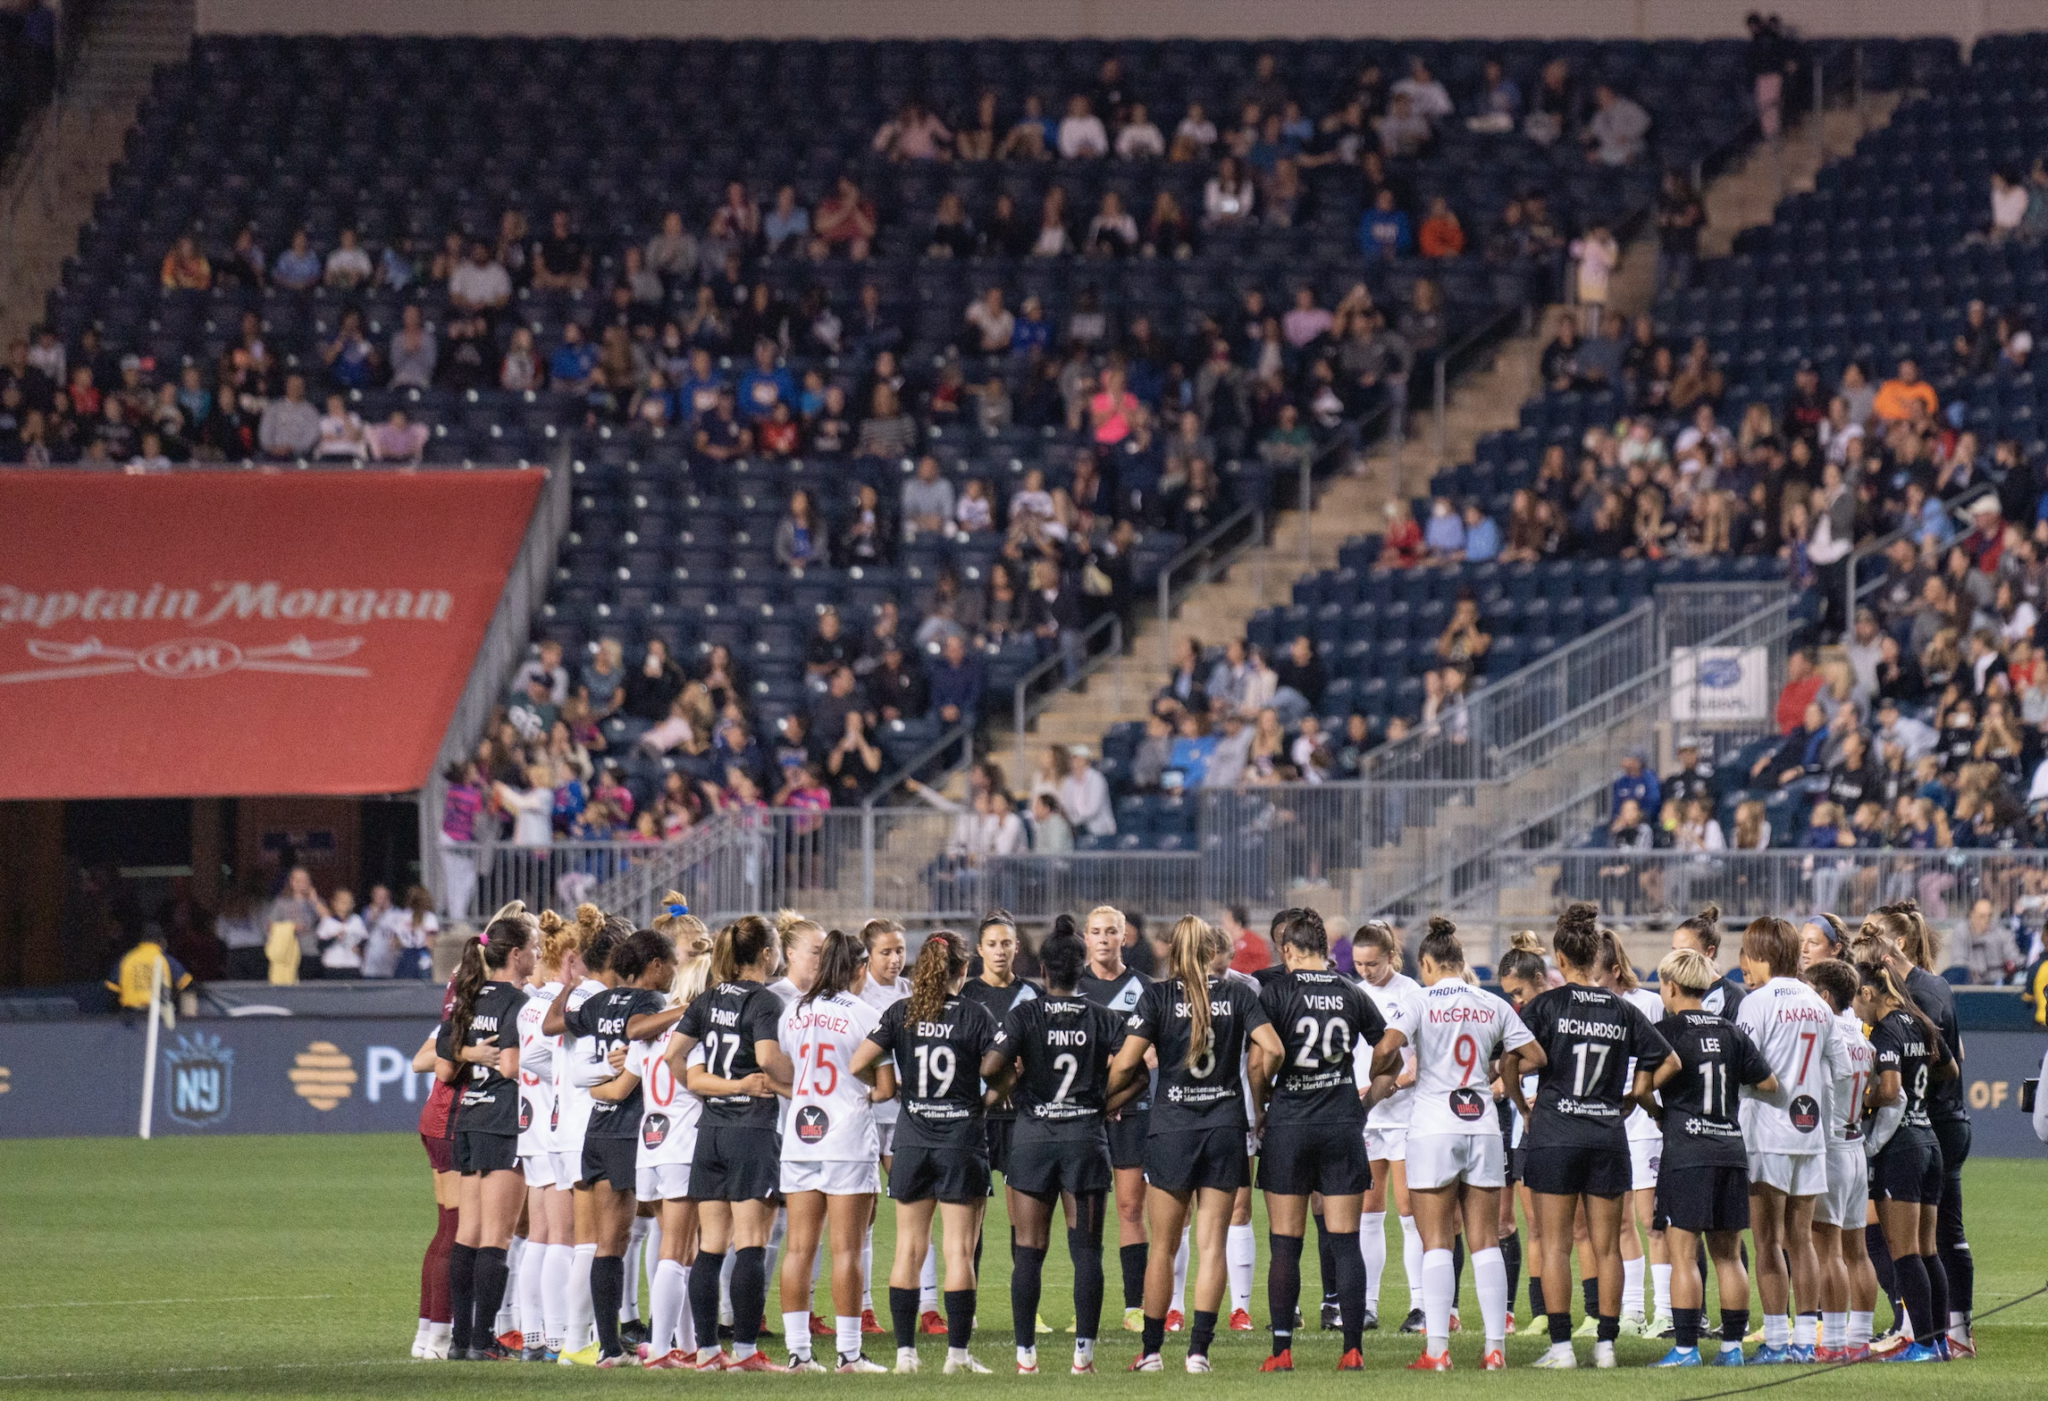 Spirit and Gotham Play to 0-0 Draw on Emotional Night in Philly Featured Image